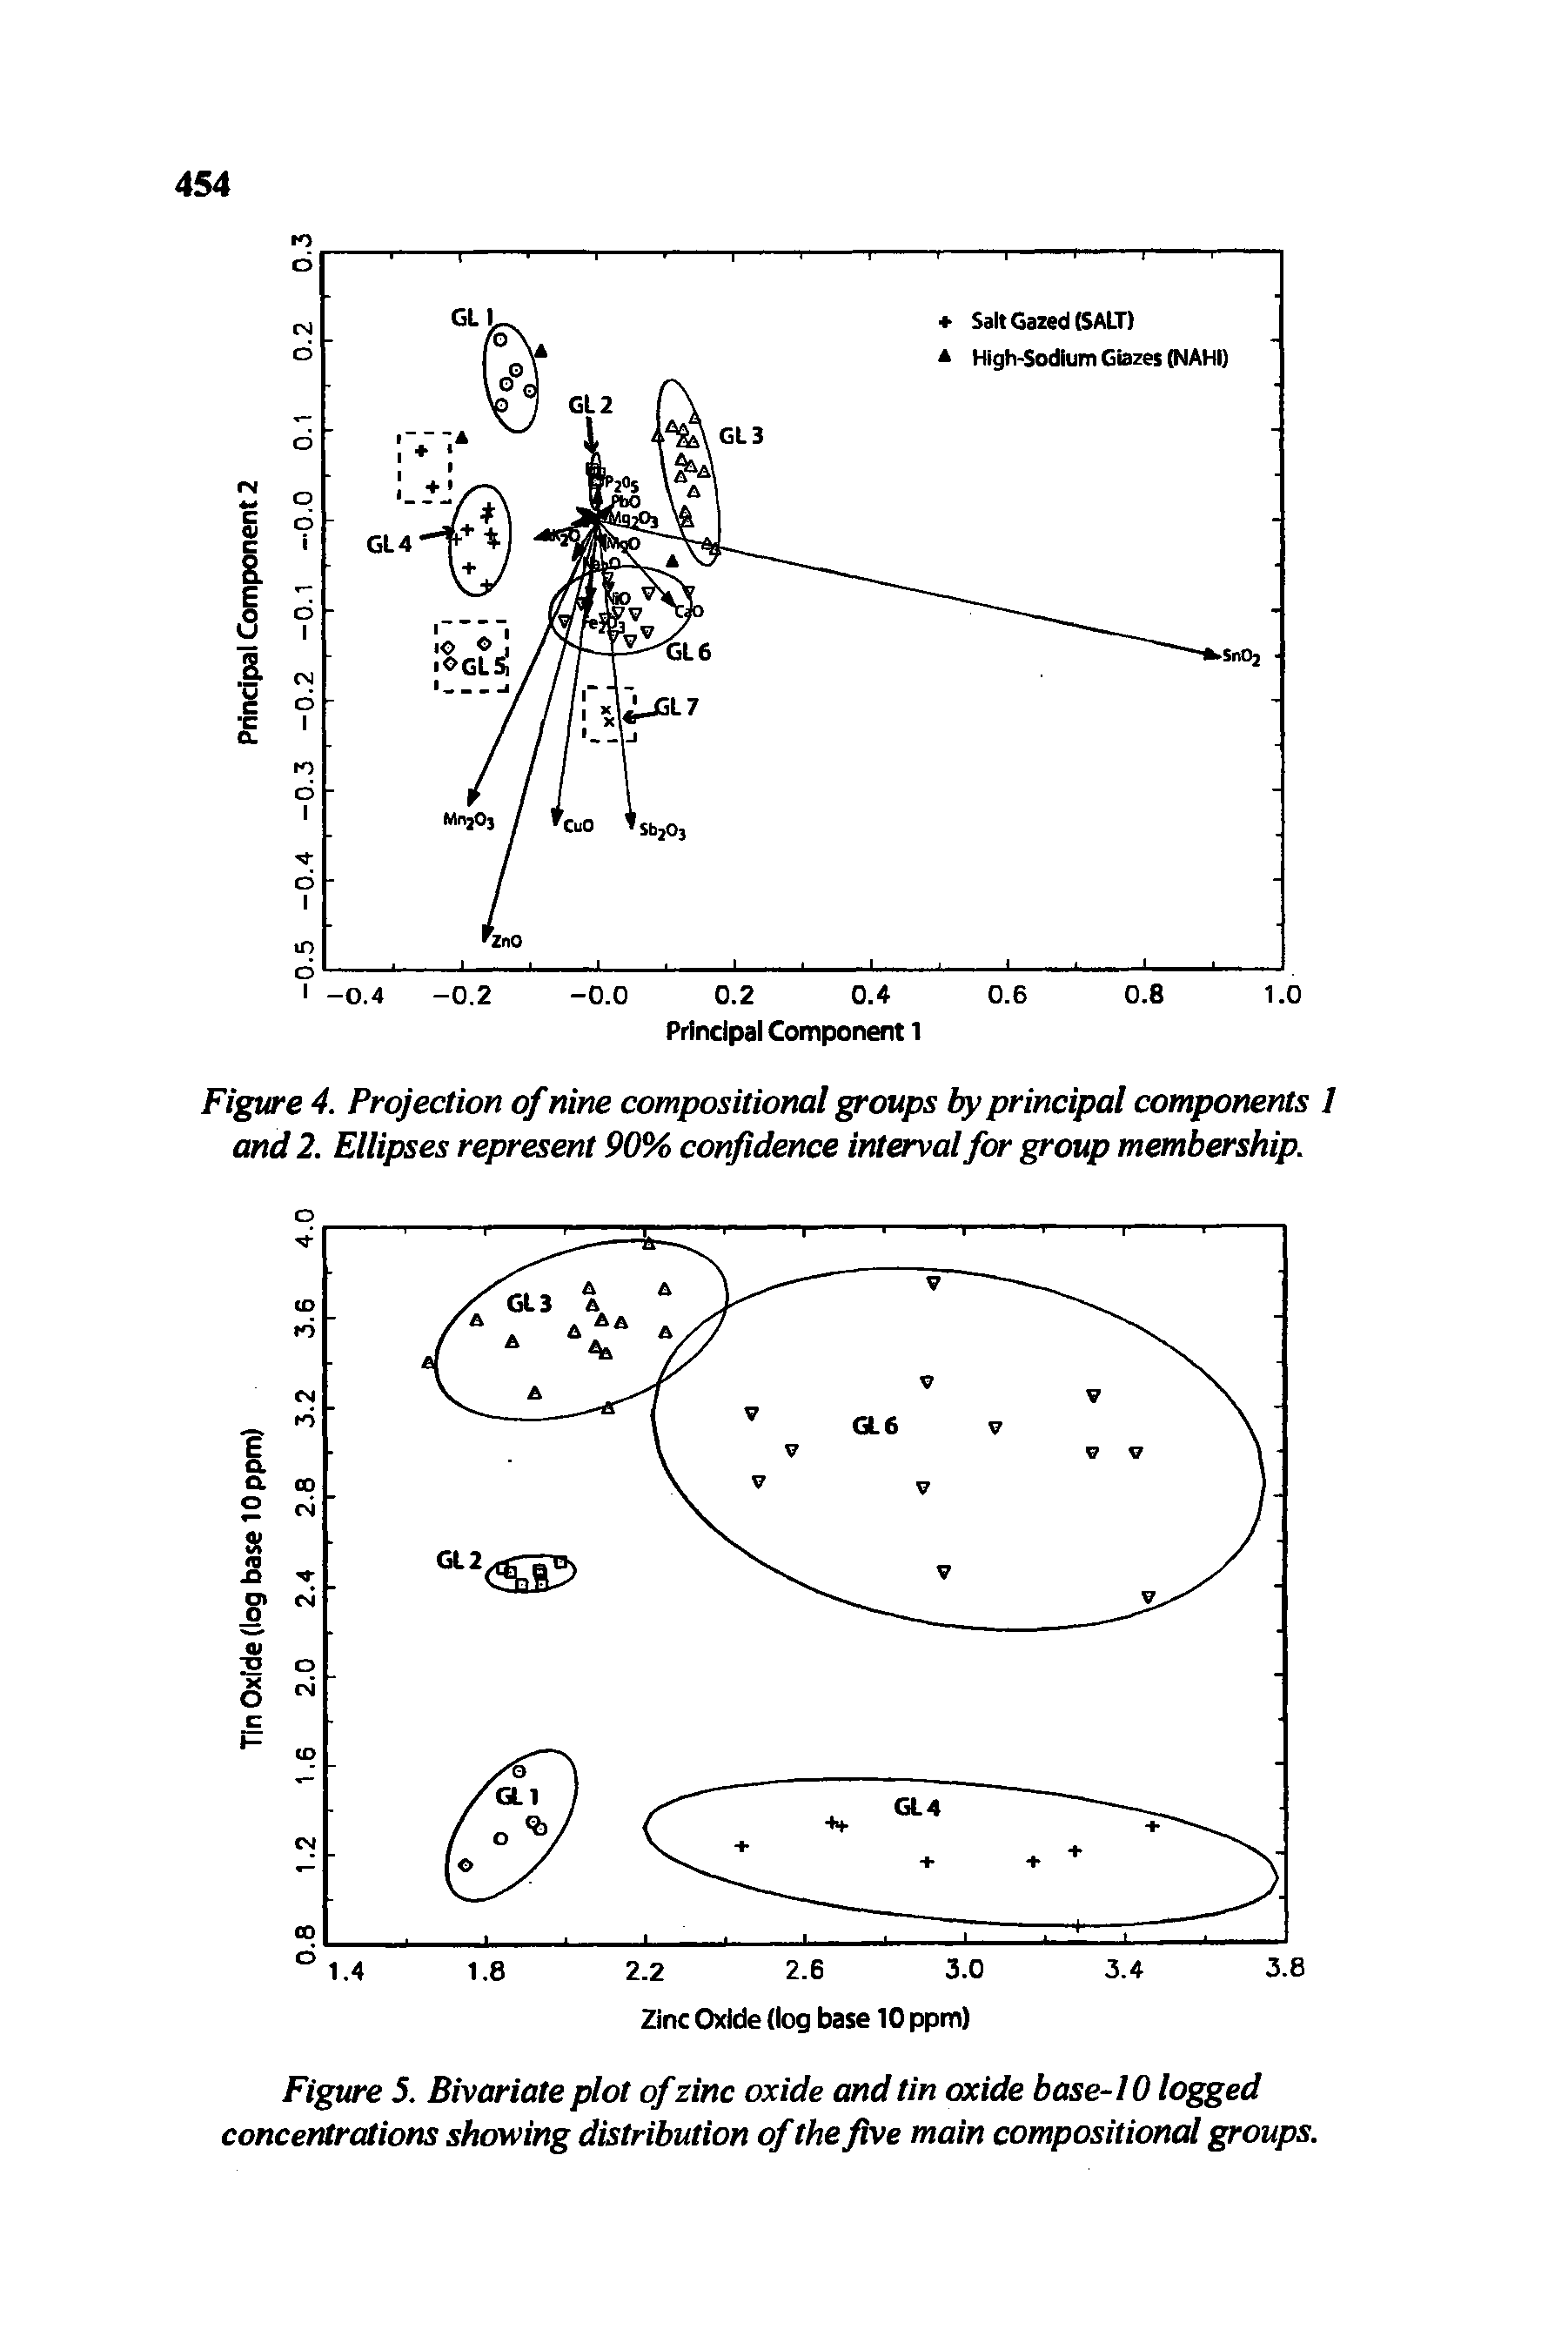 Figure 5. Bivariate plot of zinc oxide and tin oxide base-10 logged concentrations showing distribution of the five main compositional groups.